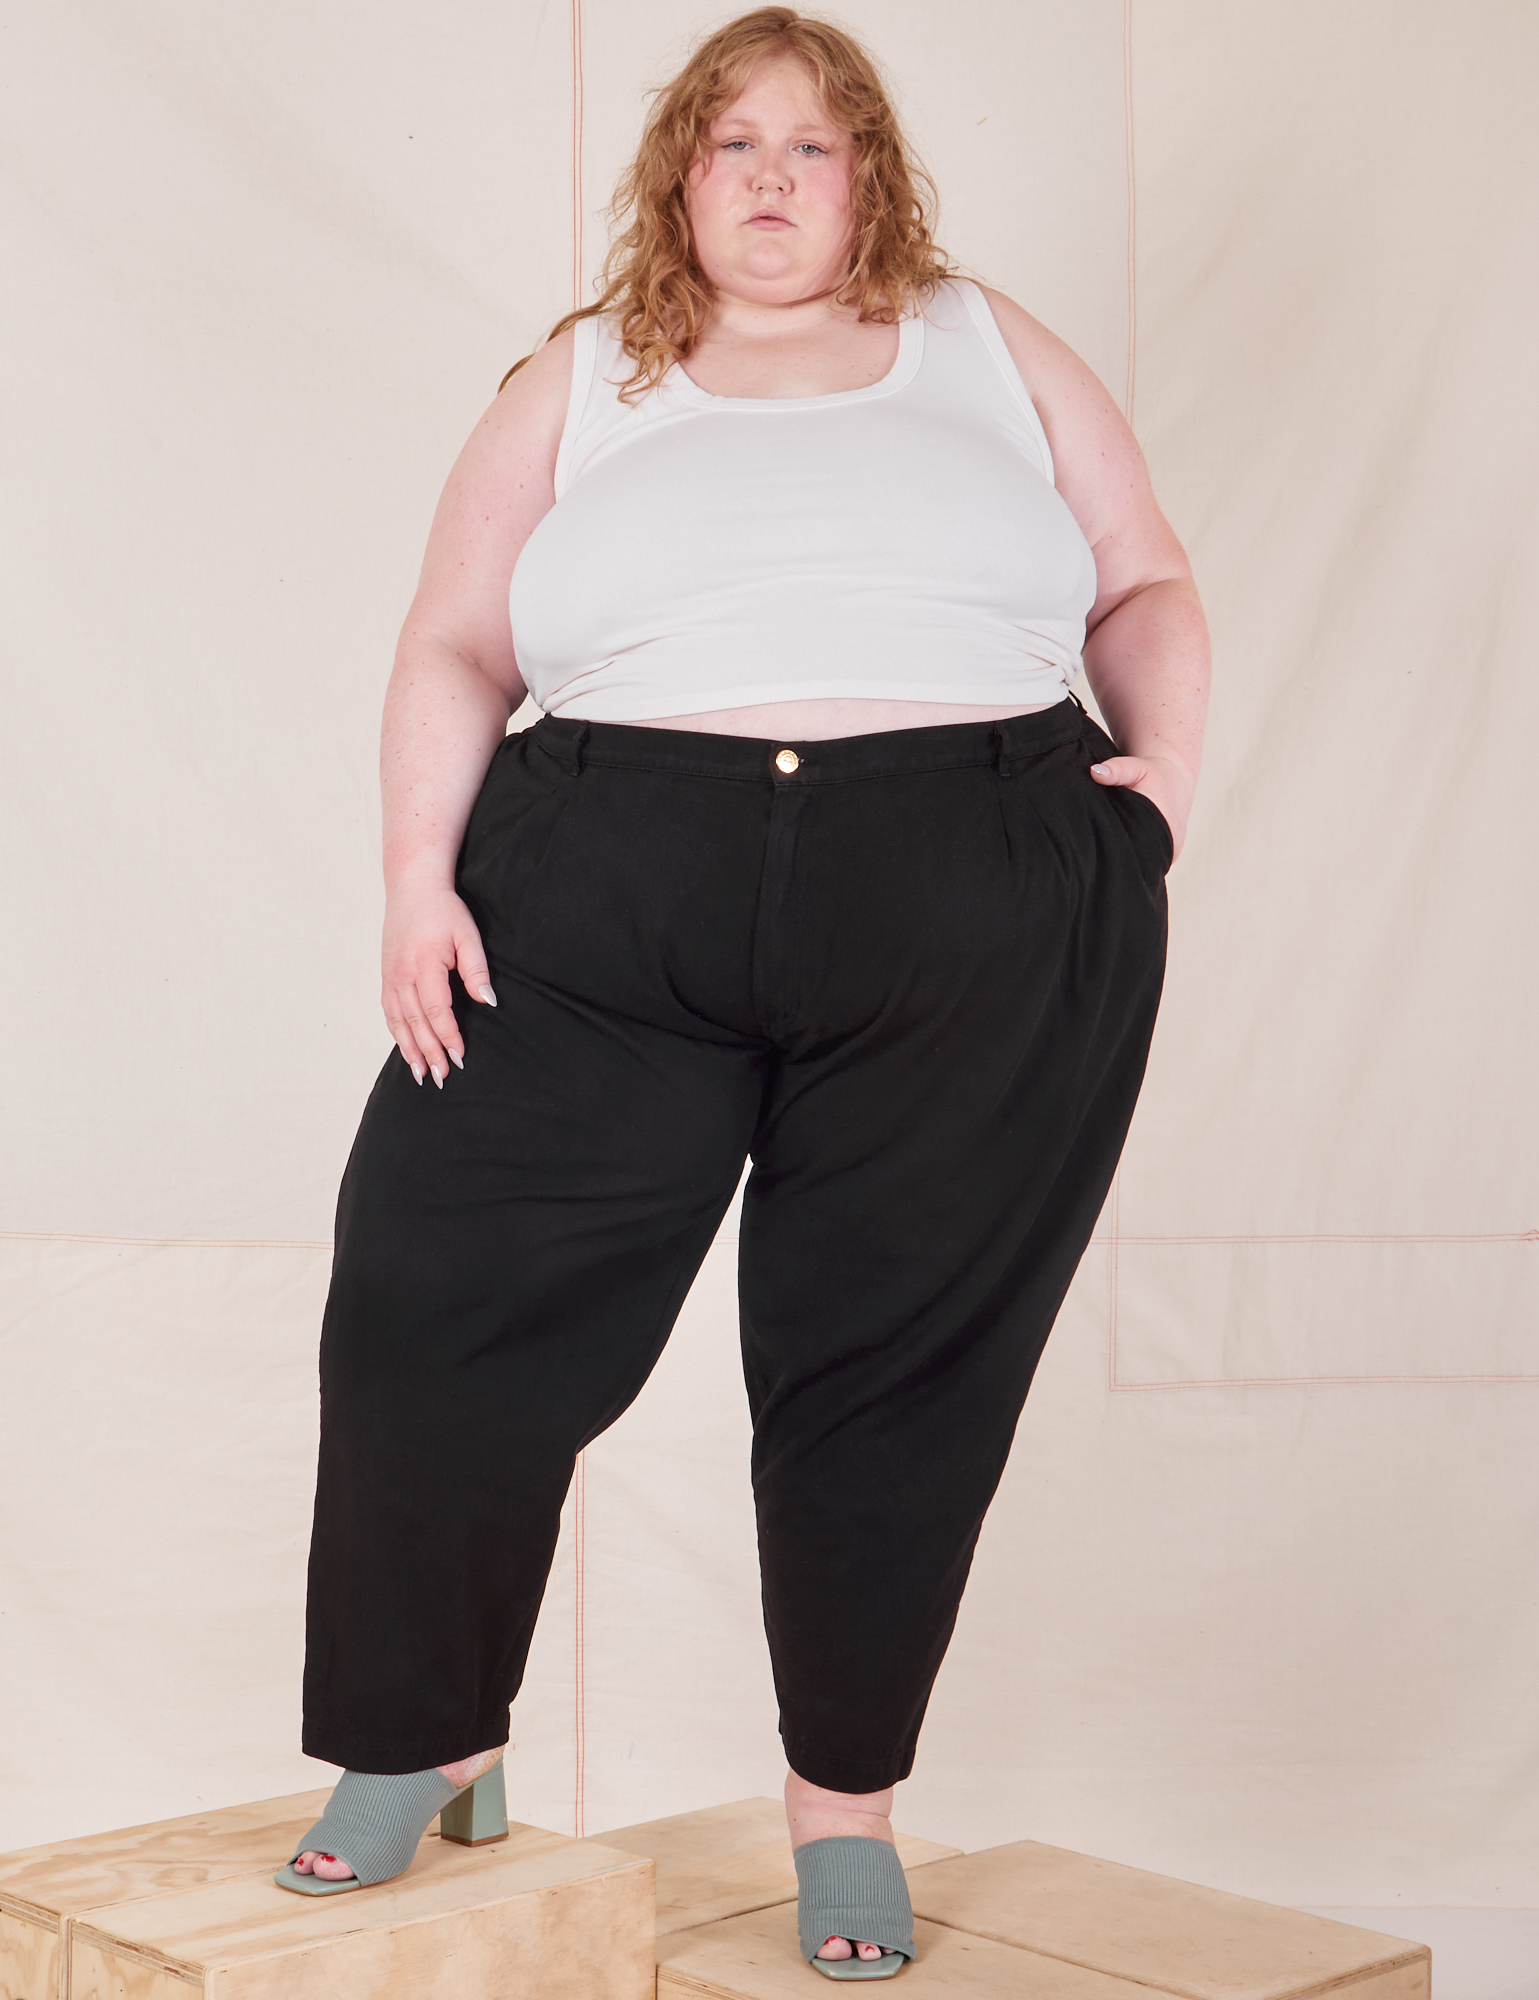 Catie is 5&#39;11&quot; and wearing 4XL Heavyweight Trousers in Basic Black paired with vintage off-white Cropped Tank Top